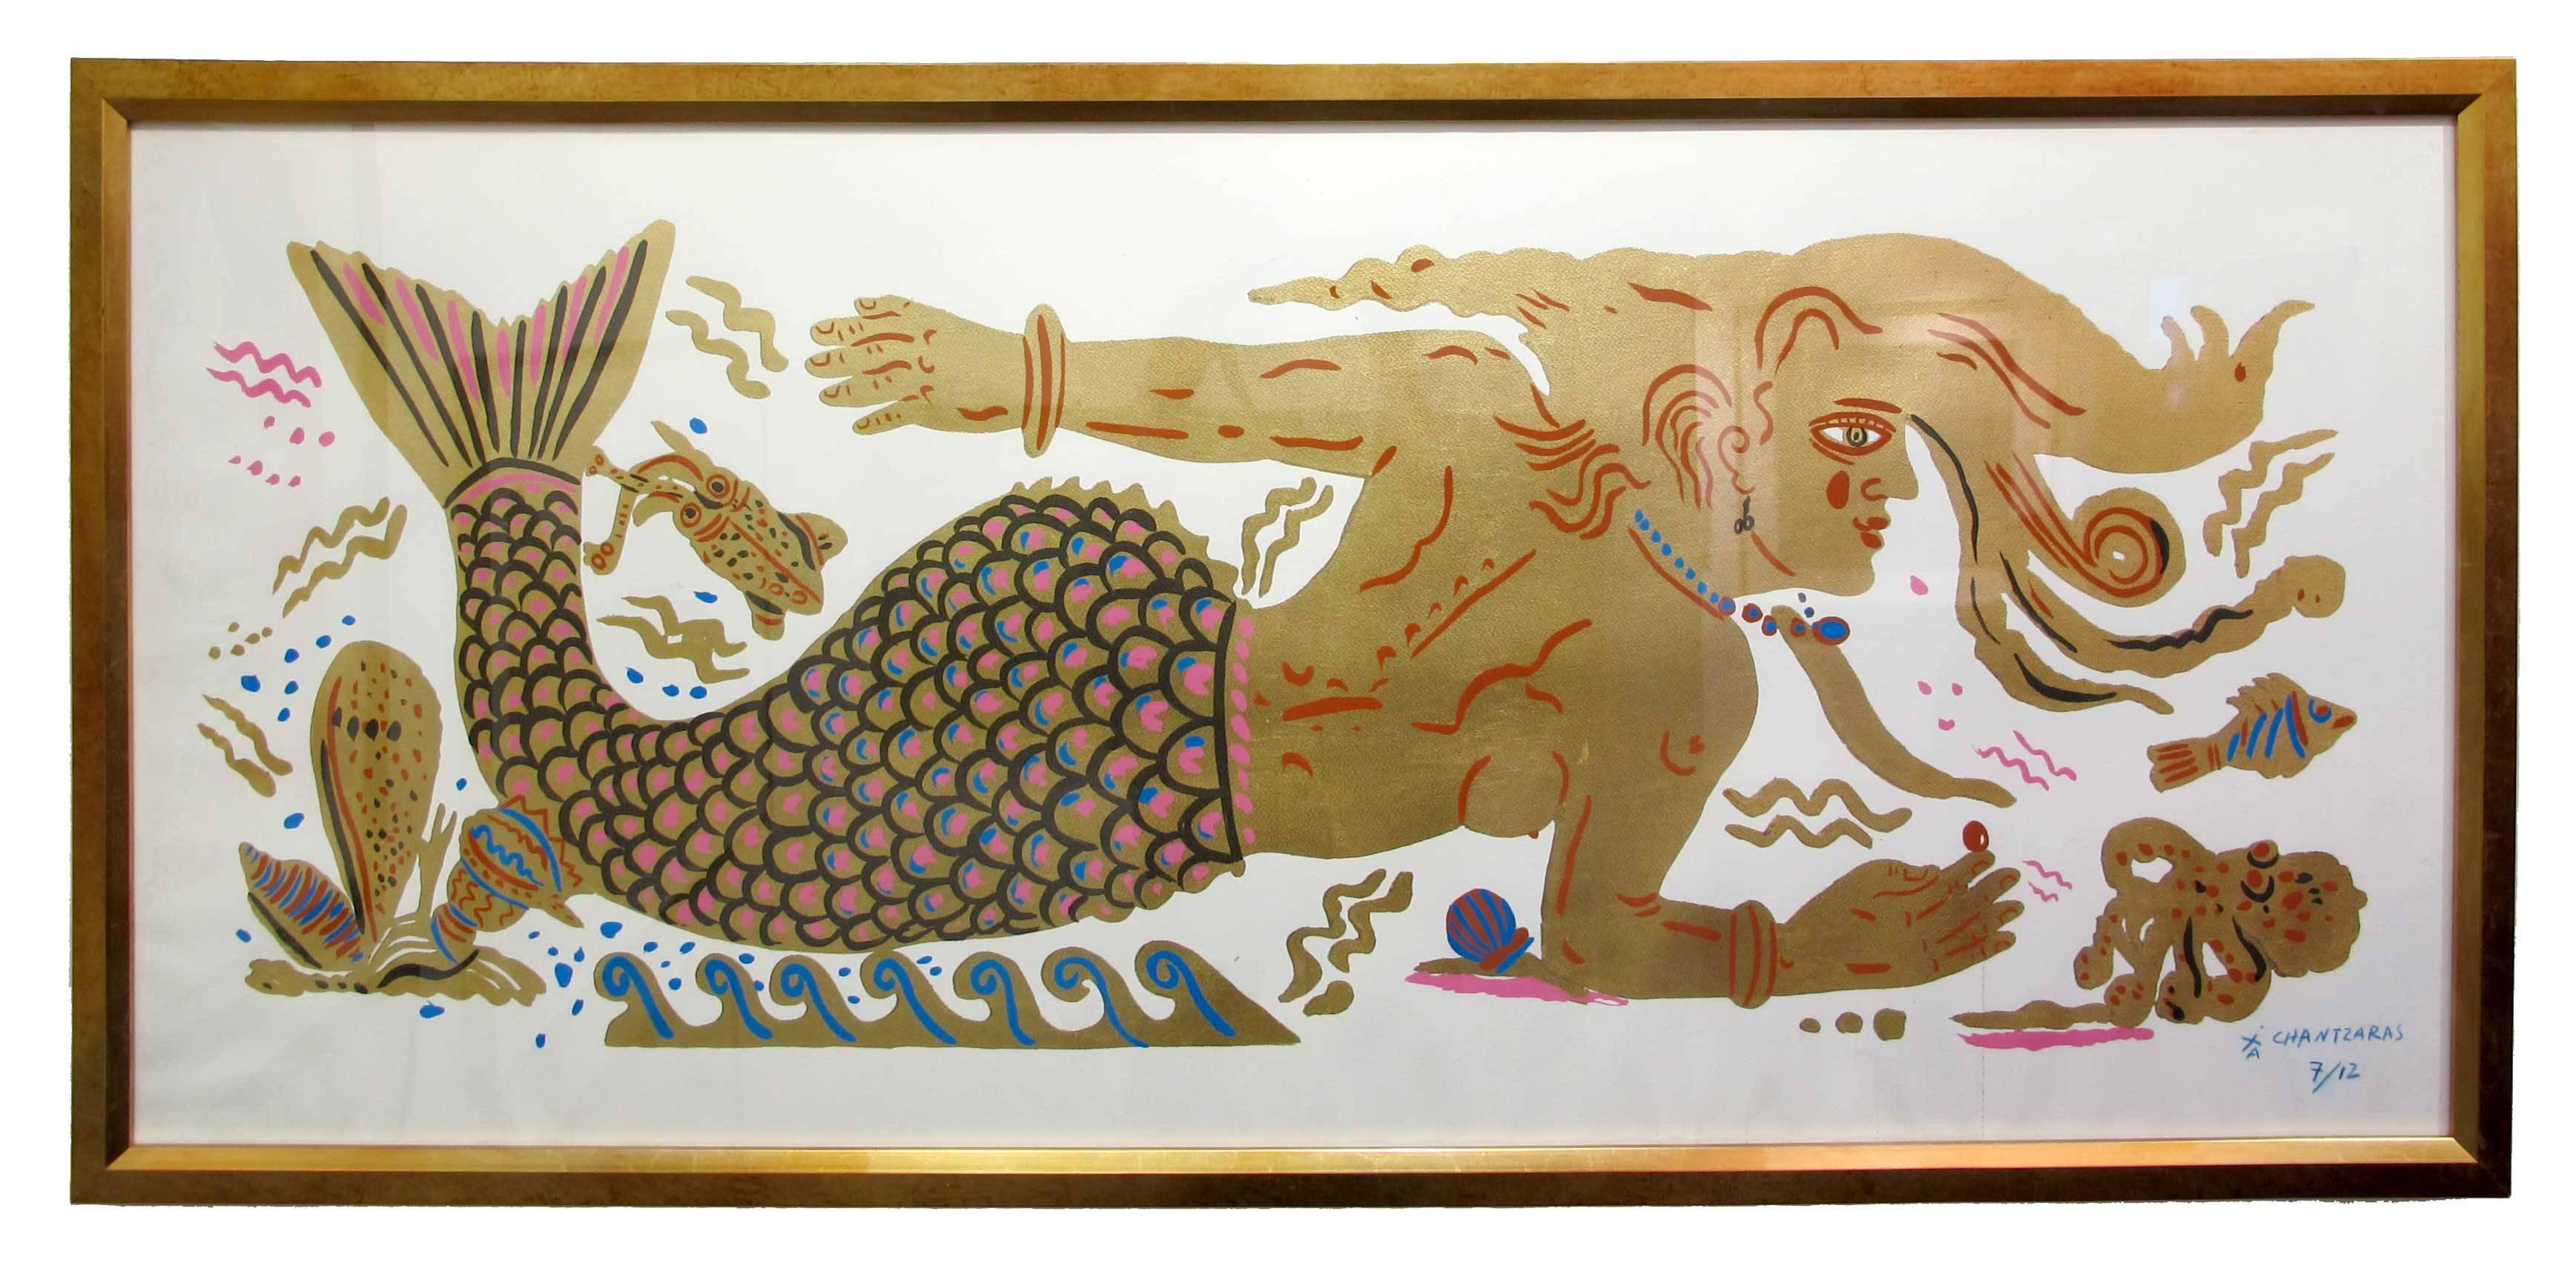 Maritime Dream Ancient Greek inspired painting on paper, hand finished gold leaf